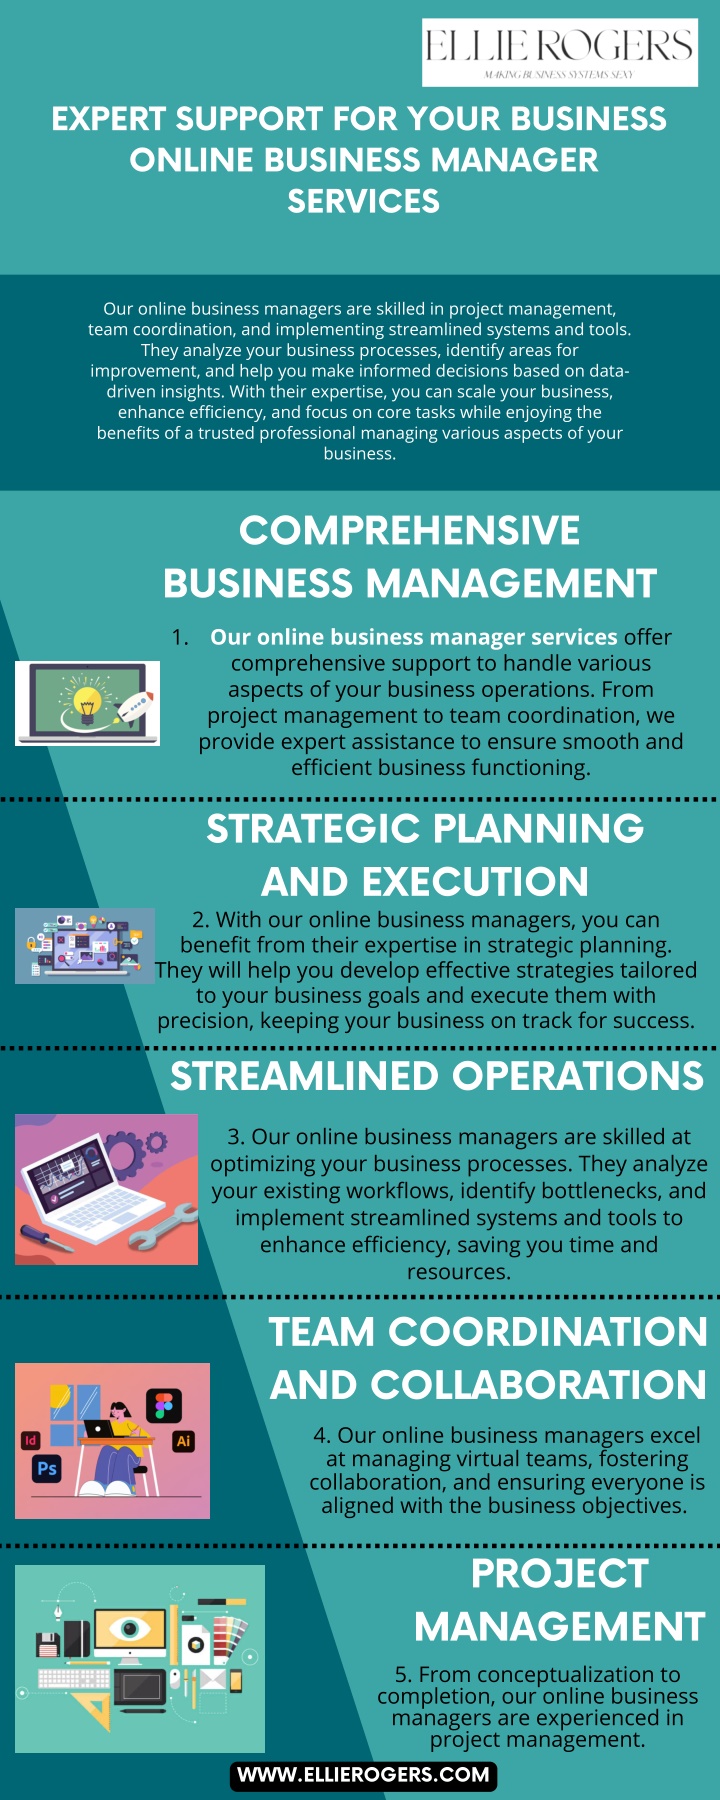 expert support for your business online business